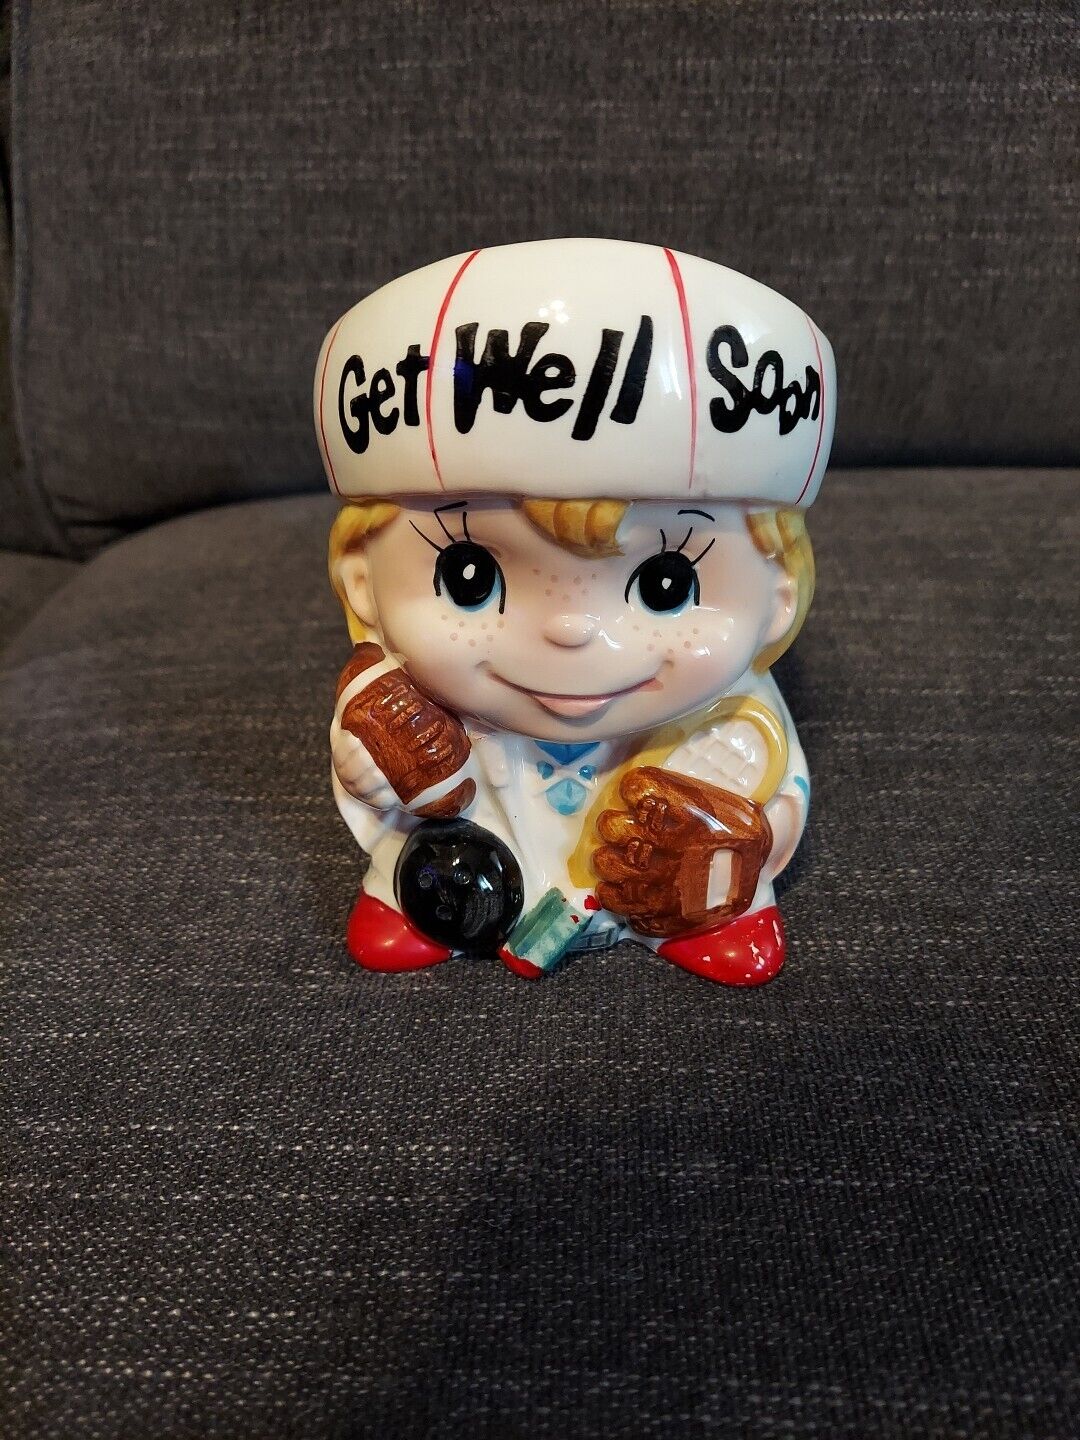 Vintage Inarco Get Well Planter Sports